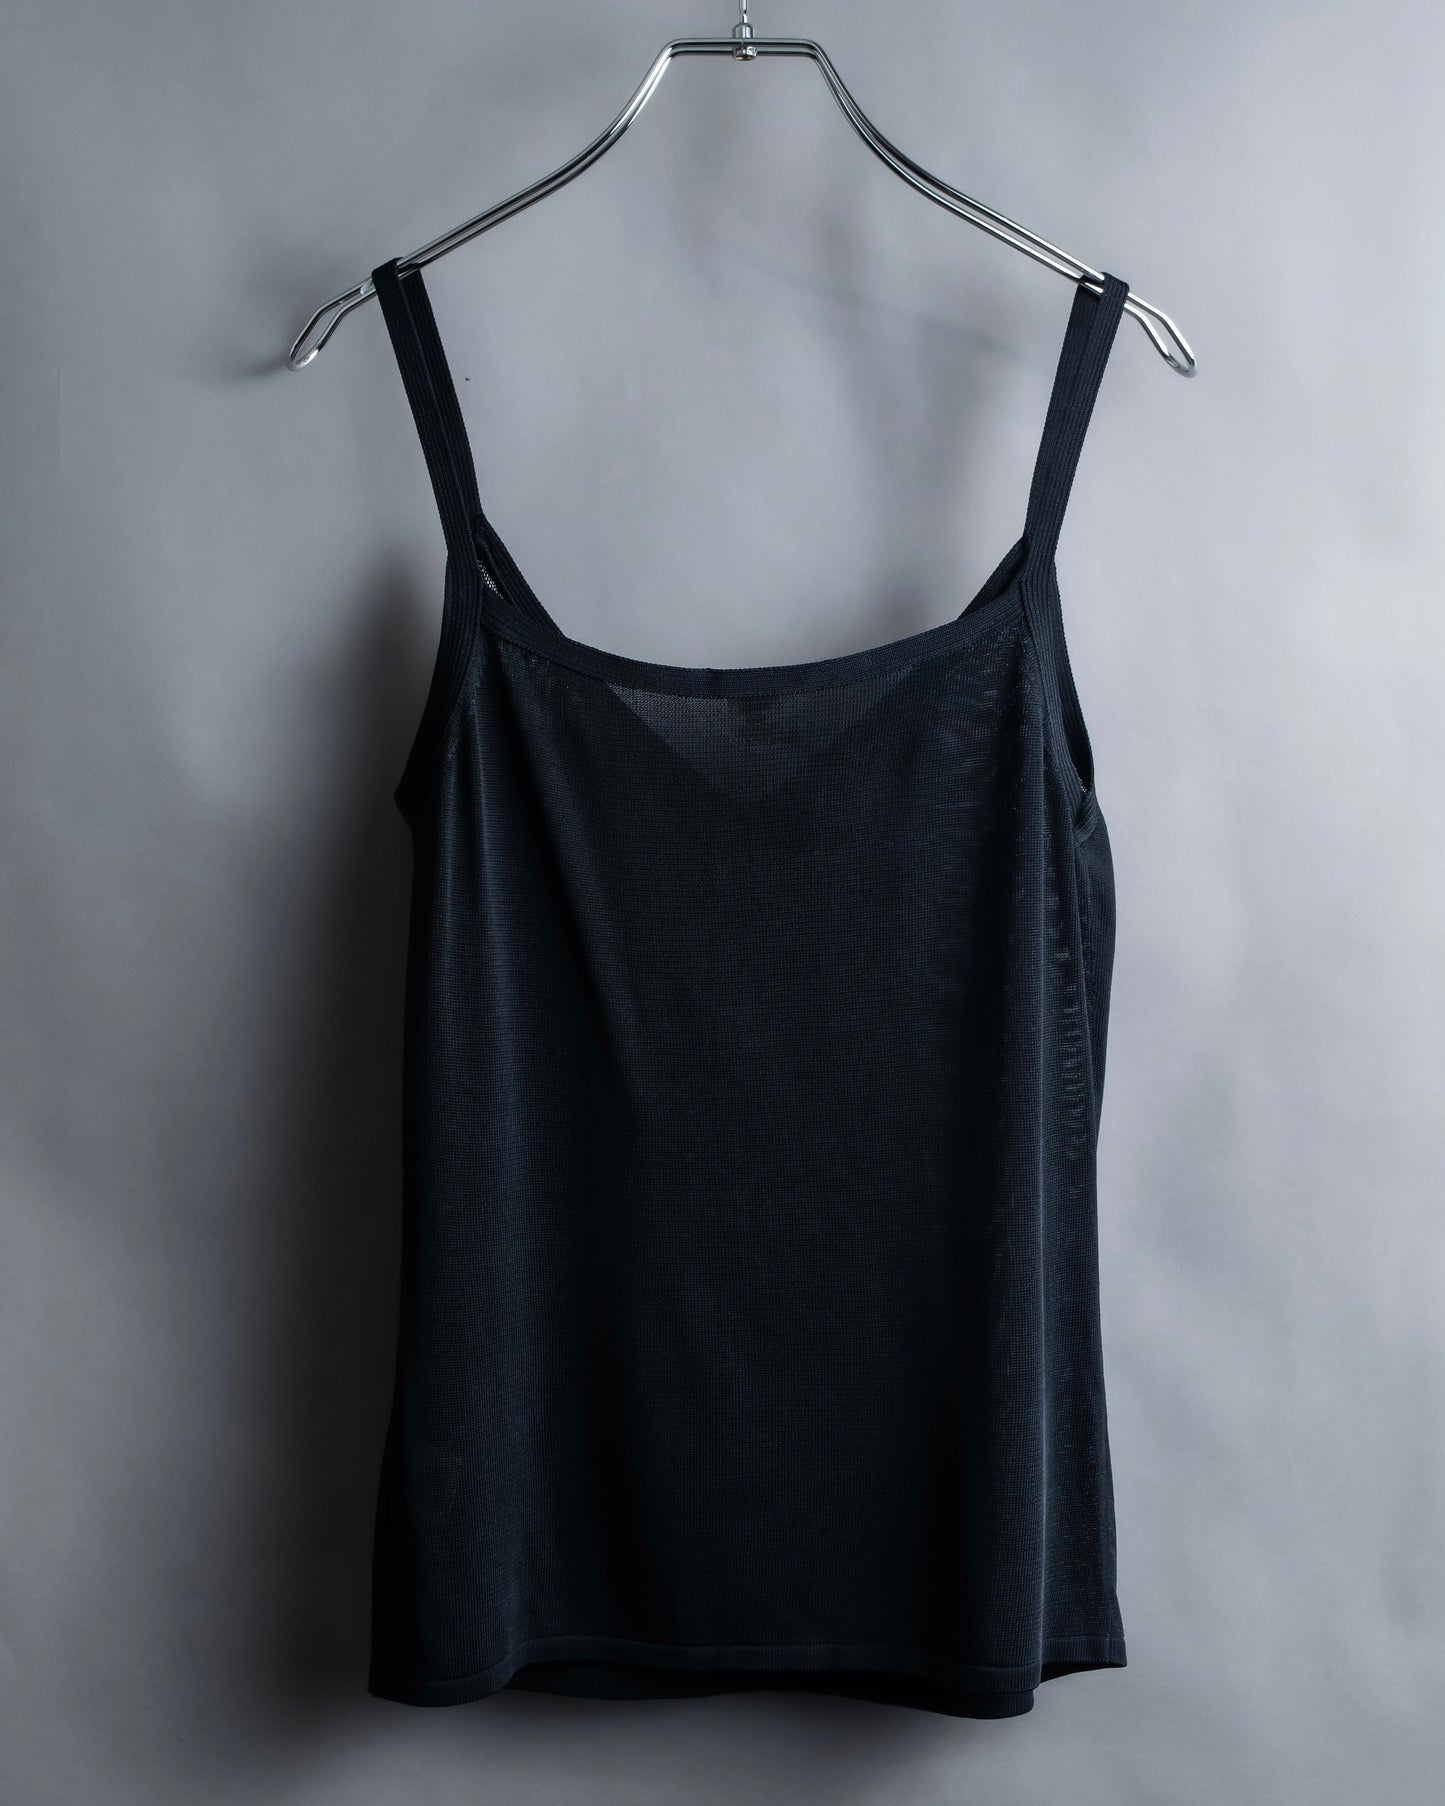 "HERMES" Sheer rayon mode style camisole